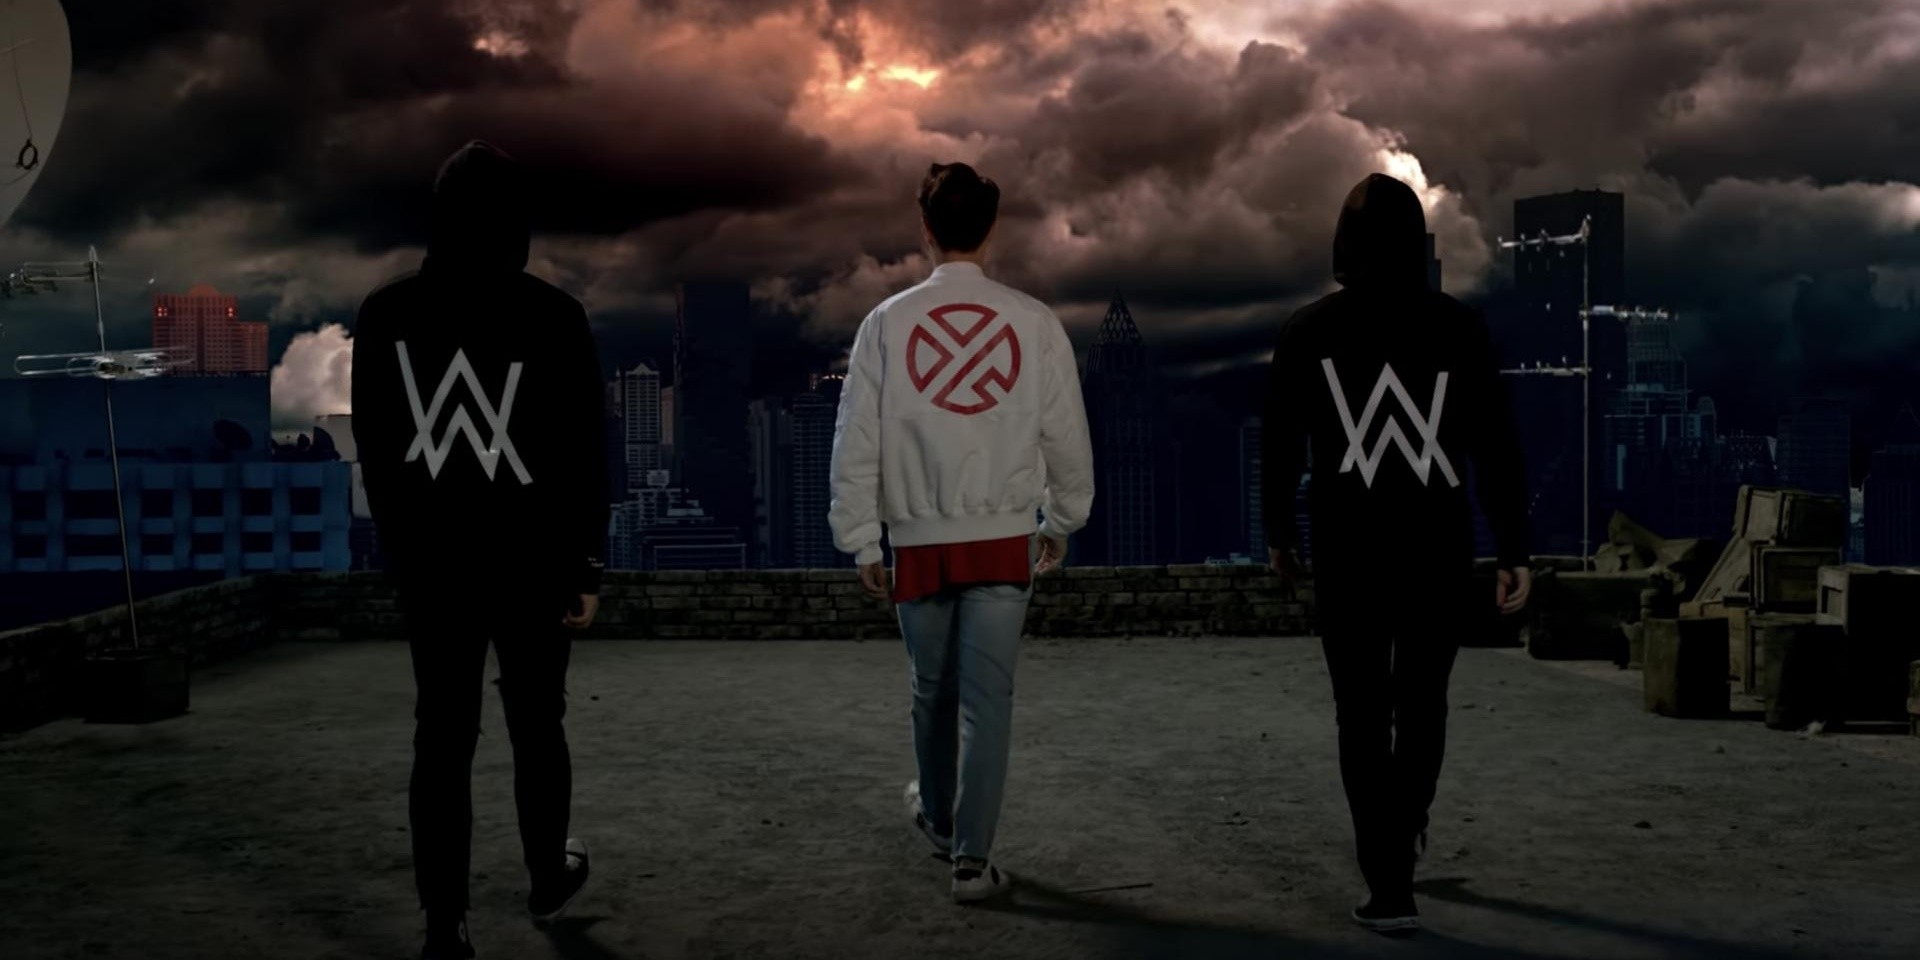 Alan Walker reworks 'Sheep' from EXO's Lay – watch